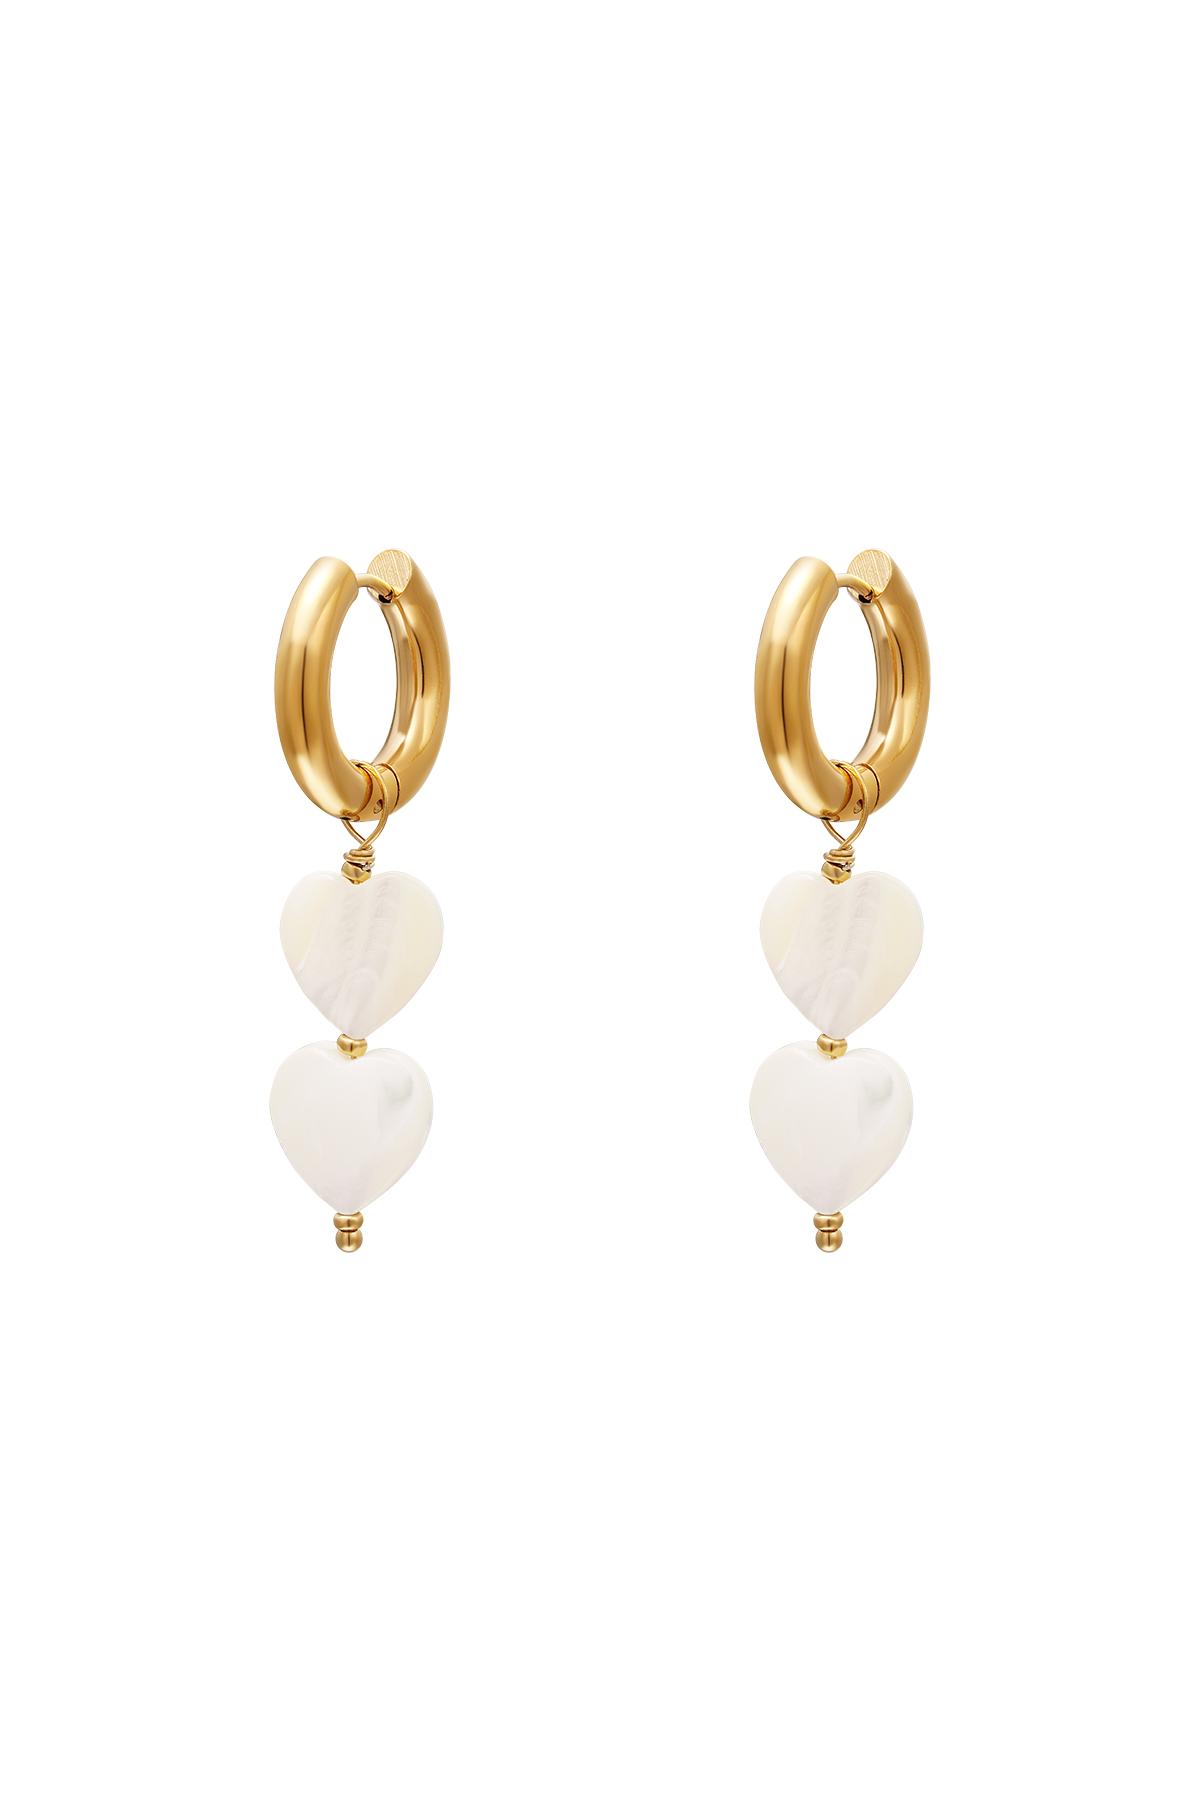 Pearl hearts earrings - #summergirls collection White gold Sea Shells